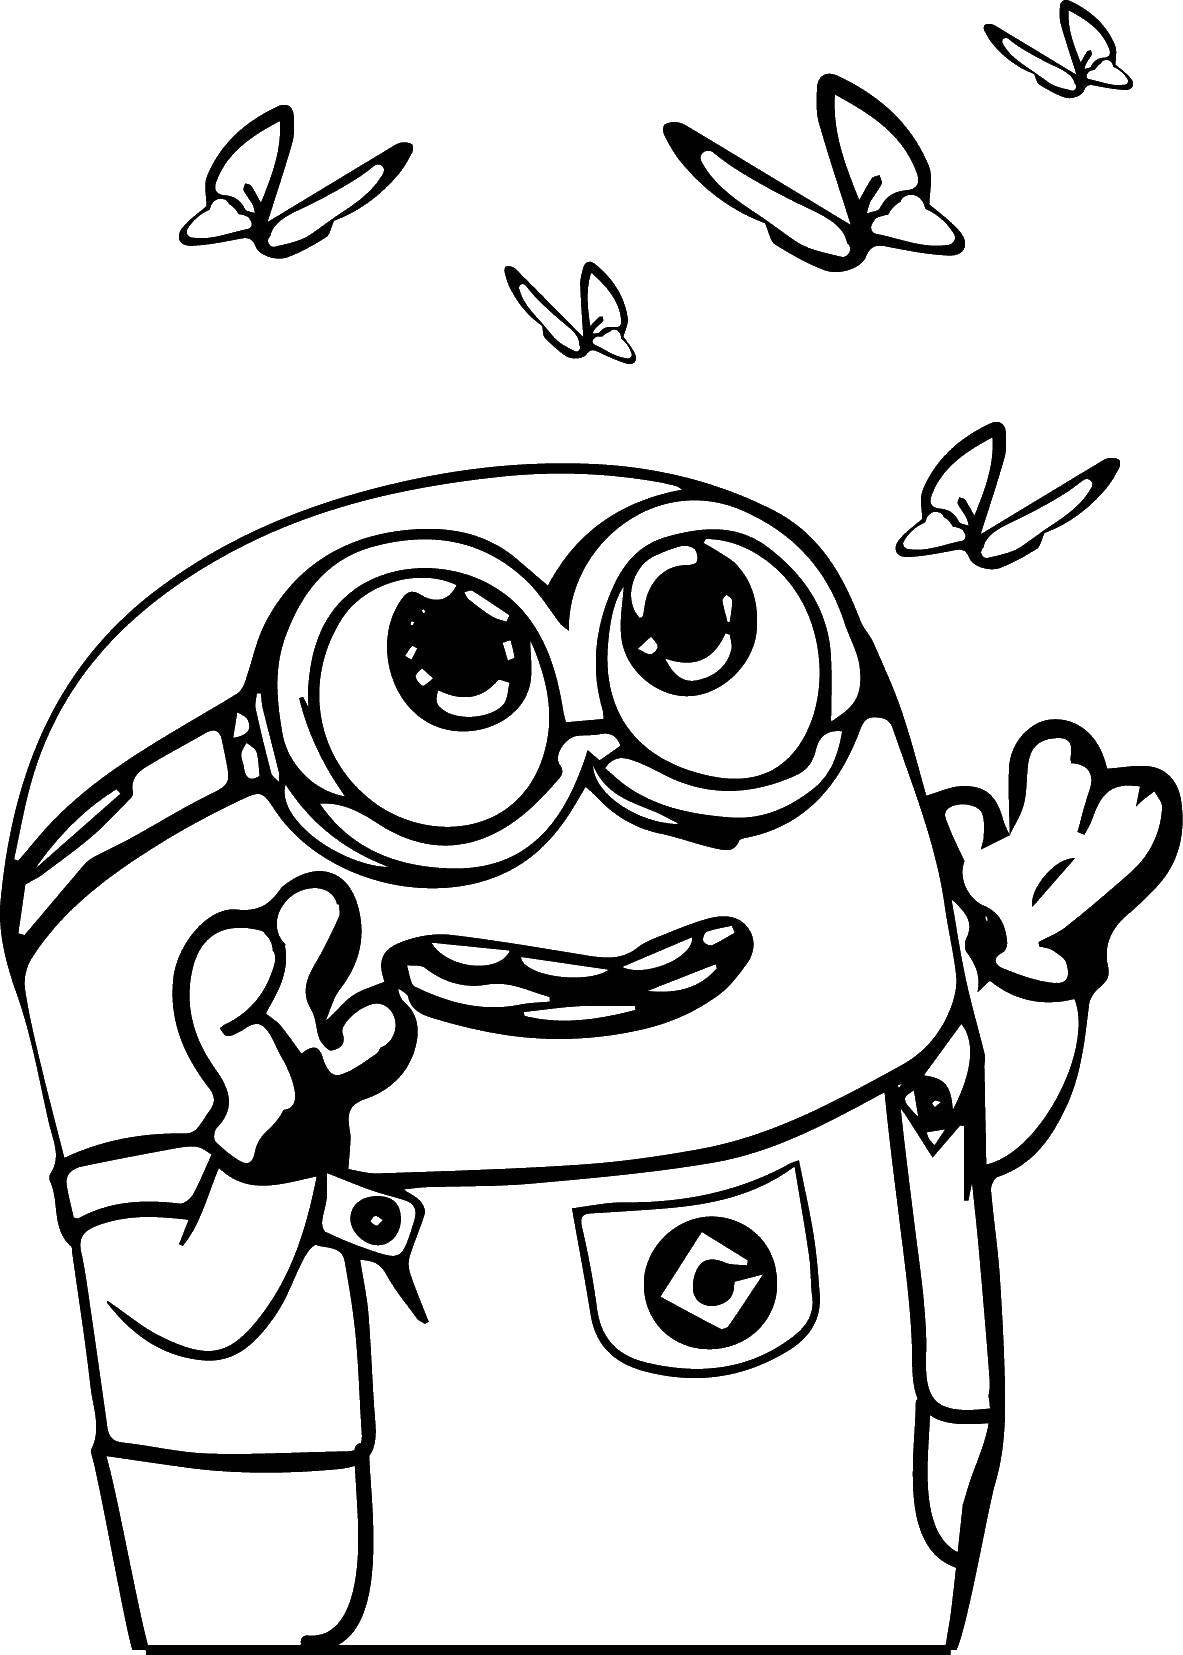 Coloring Minion catches butterflies. Category the minions. Tags:  minion.